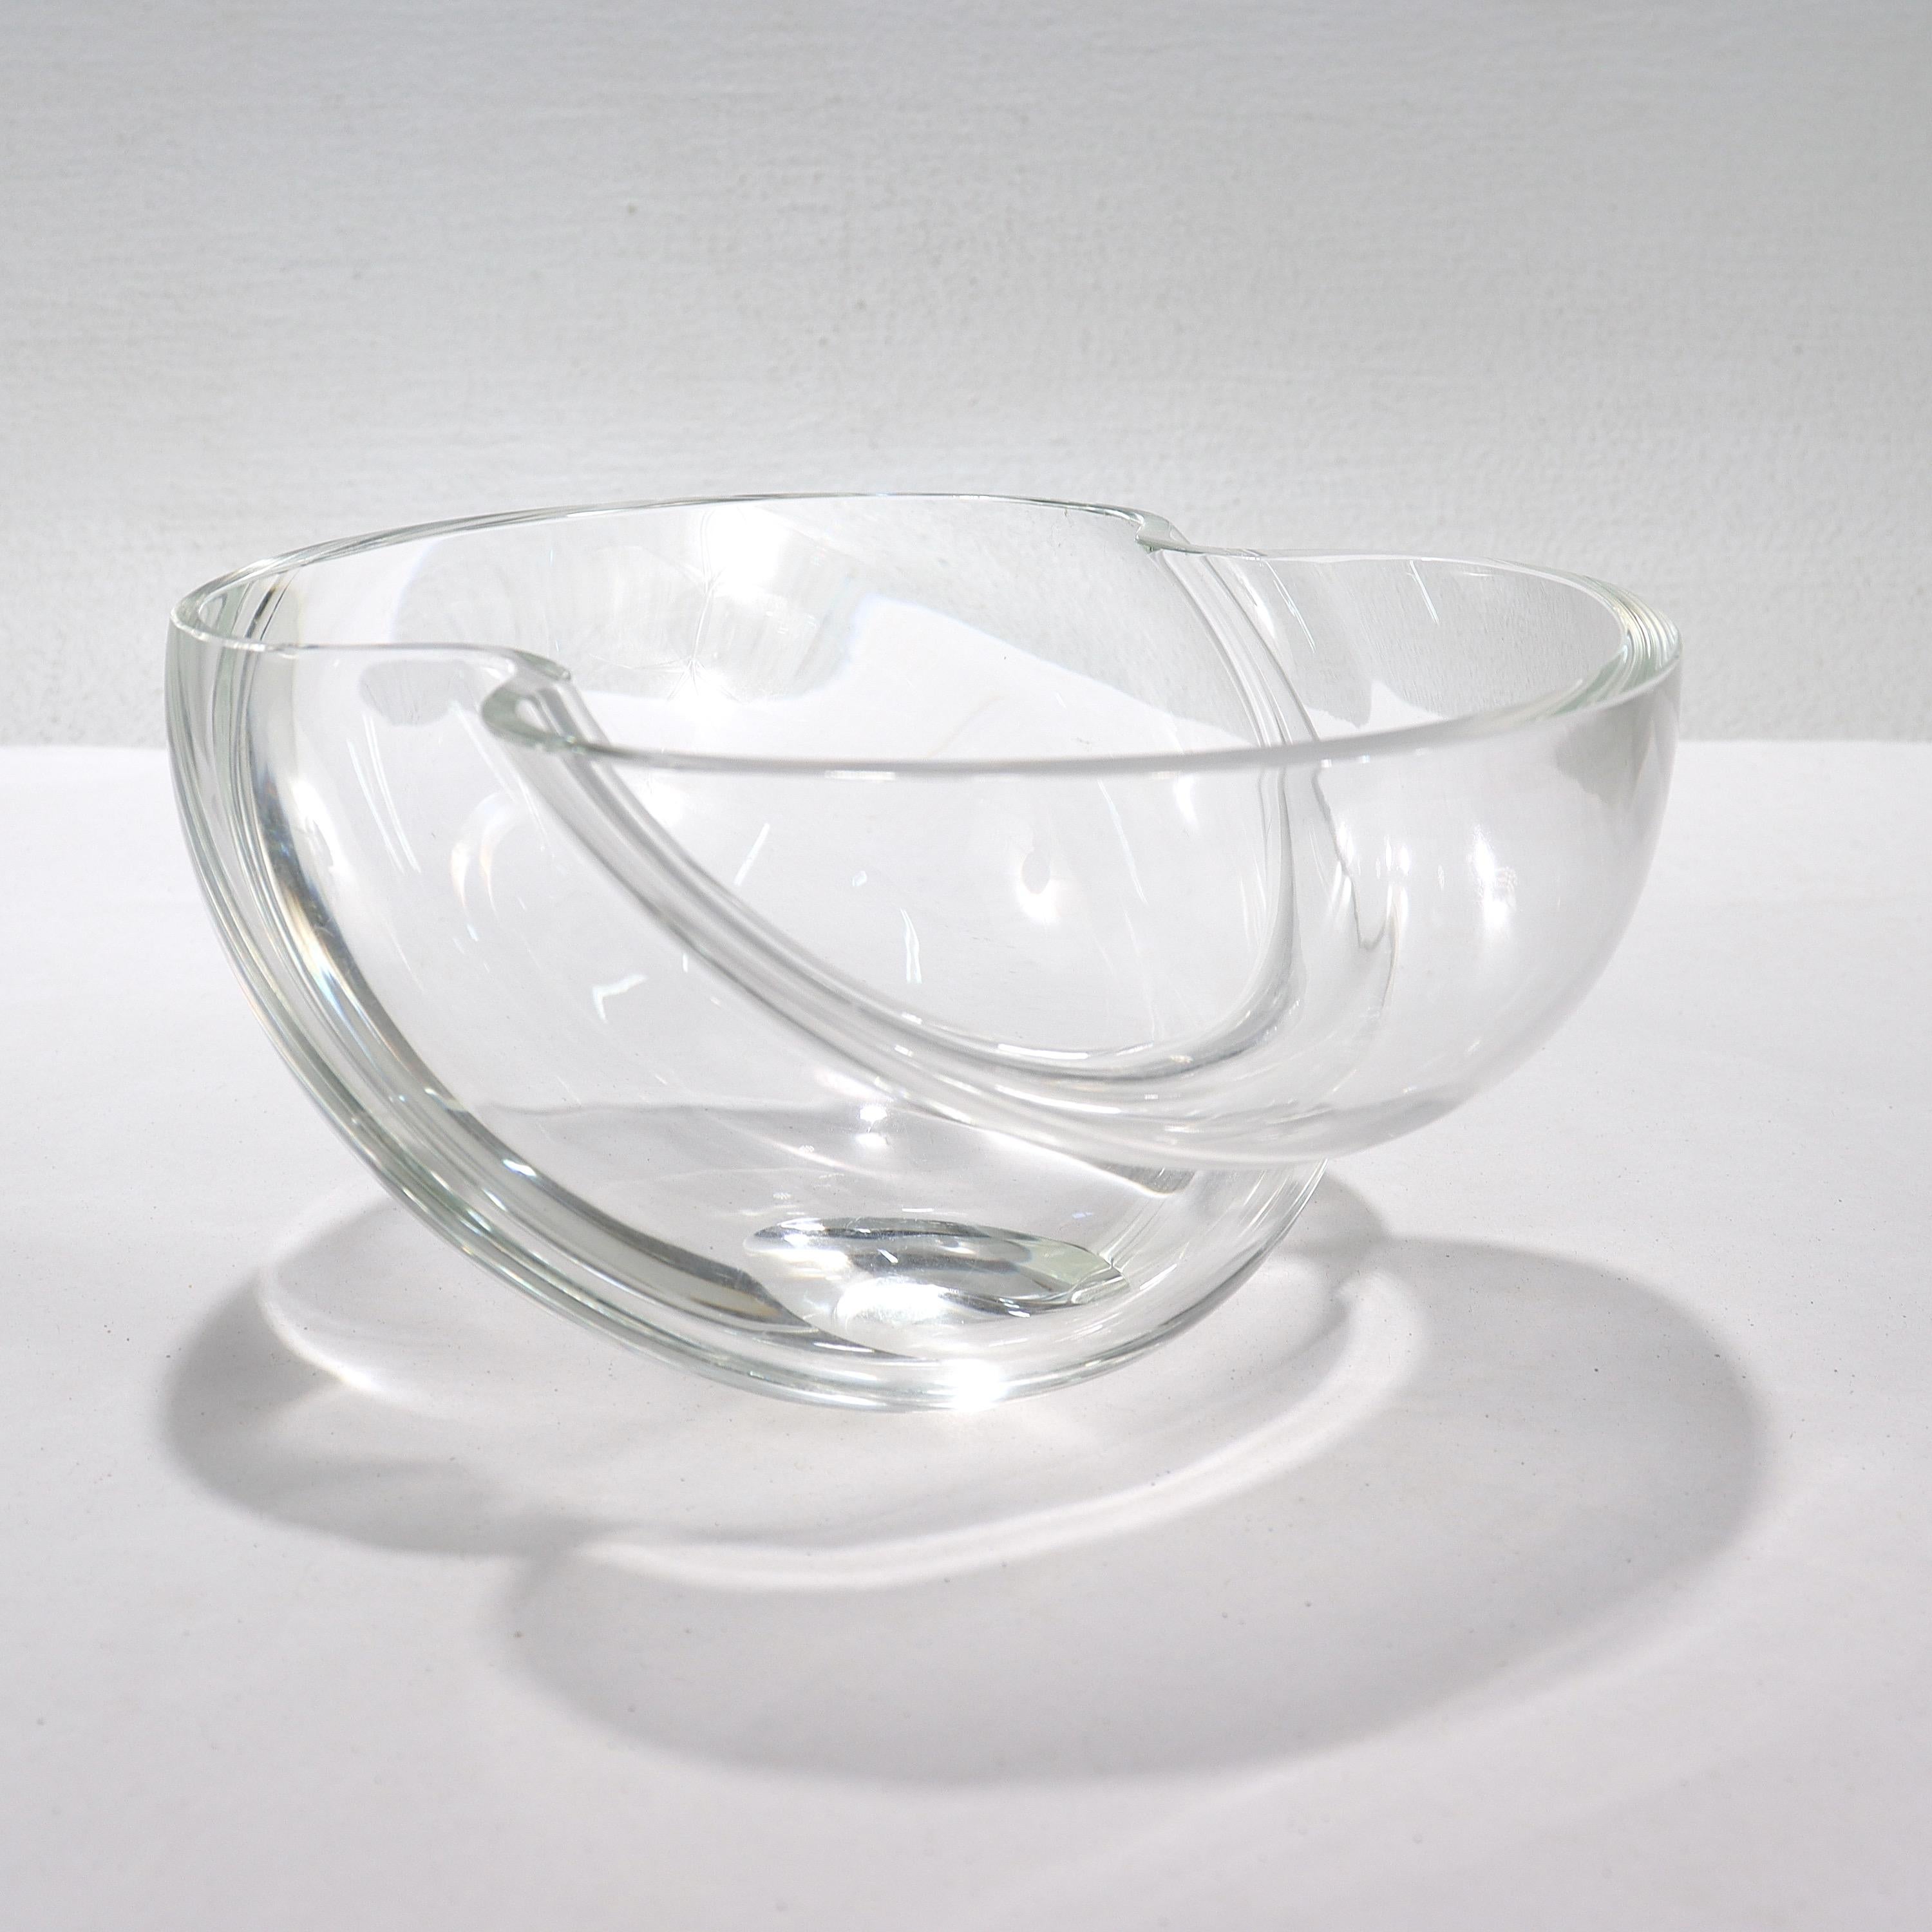 A fine Steuben shaped crystal or glass bowl.

Designed by Paul Schultze.

In the Nimbus pattern.

Marked to the base with Steuben / PS for Paul Schultze.

Simply a stunning piece of Steuben glass!

Date:
Late 20th Century

Overall